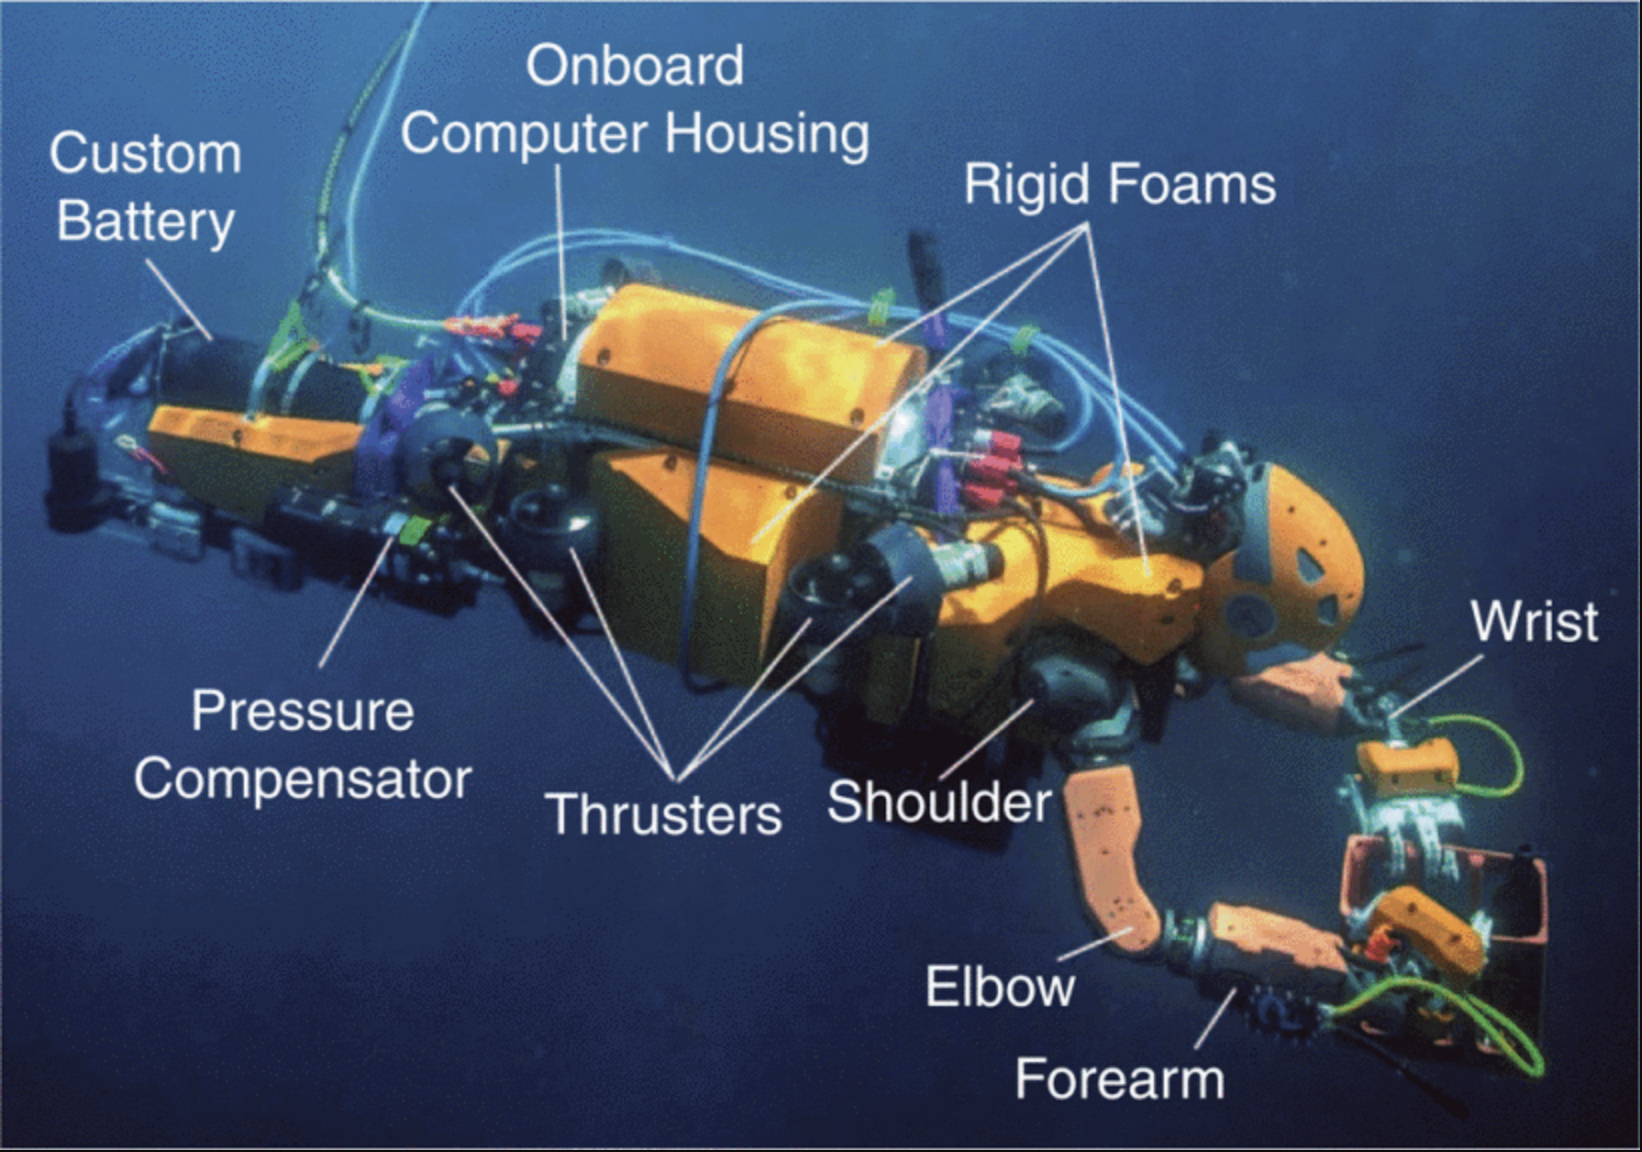 Ocean One: A Robotic Avatar for Oceanic Discovery